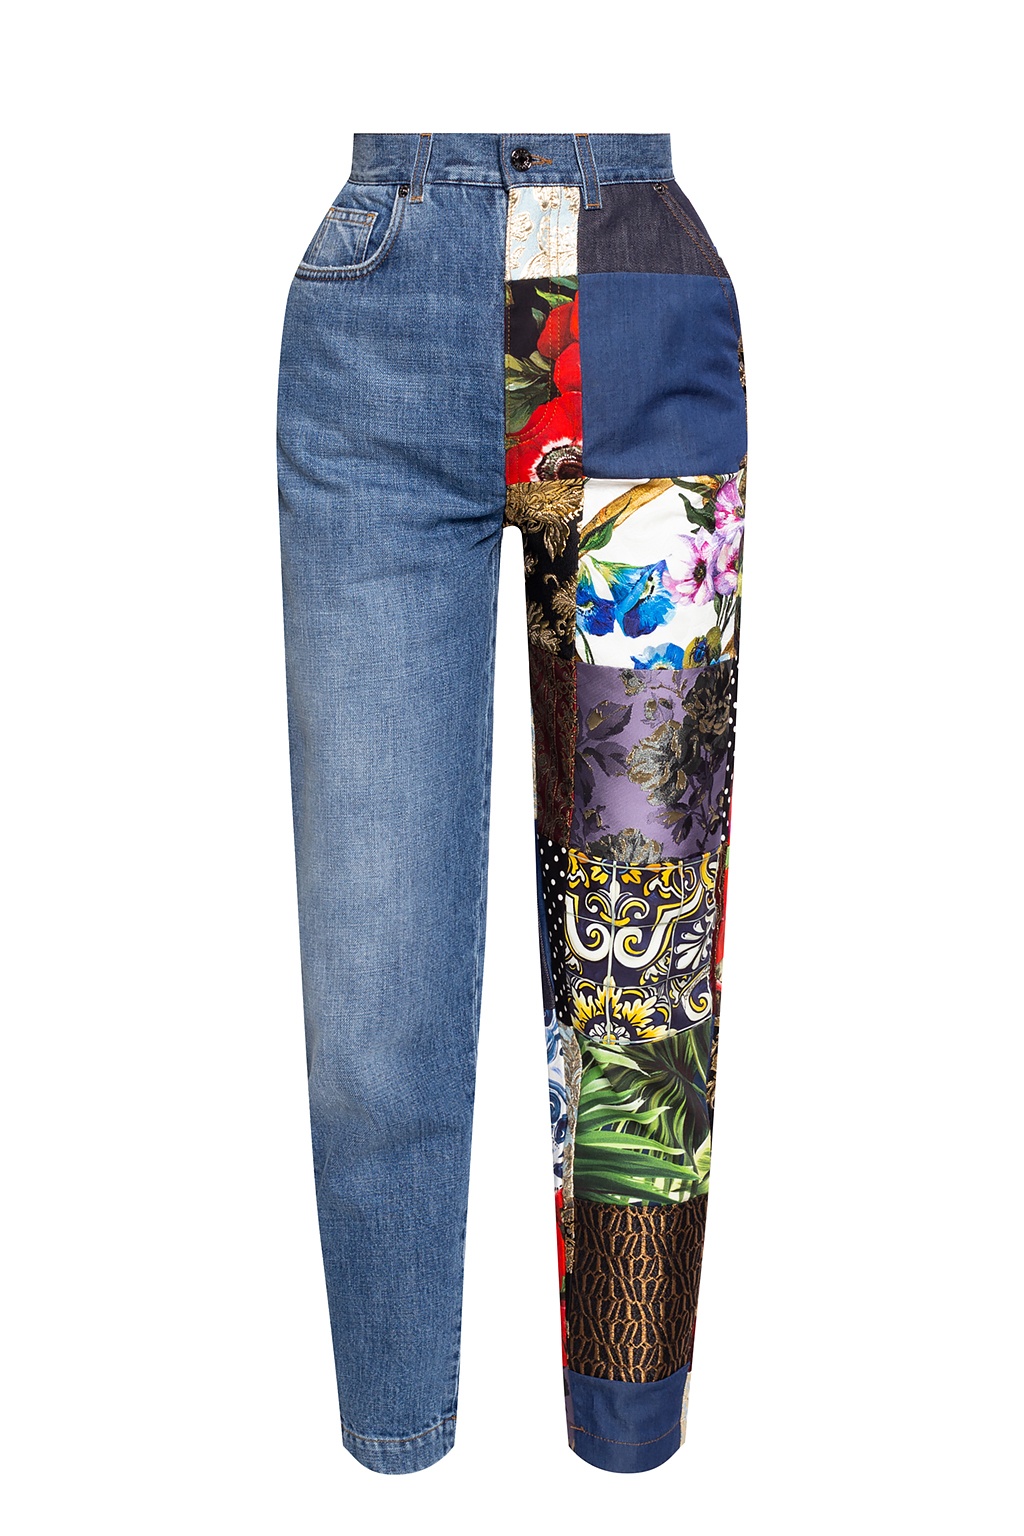 Blue Embroidered jeans Dolce & Gabbana - Vitkac Italy